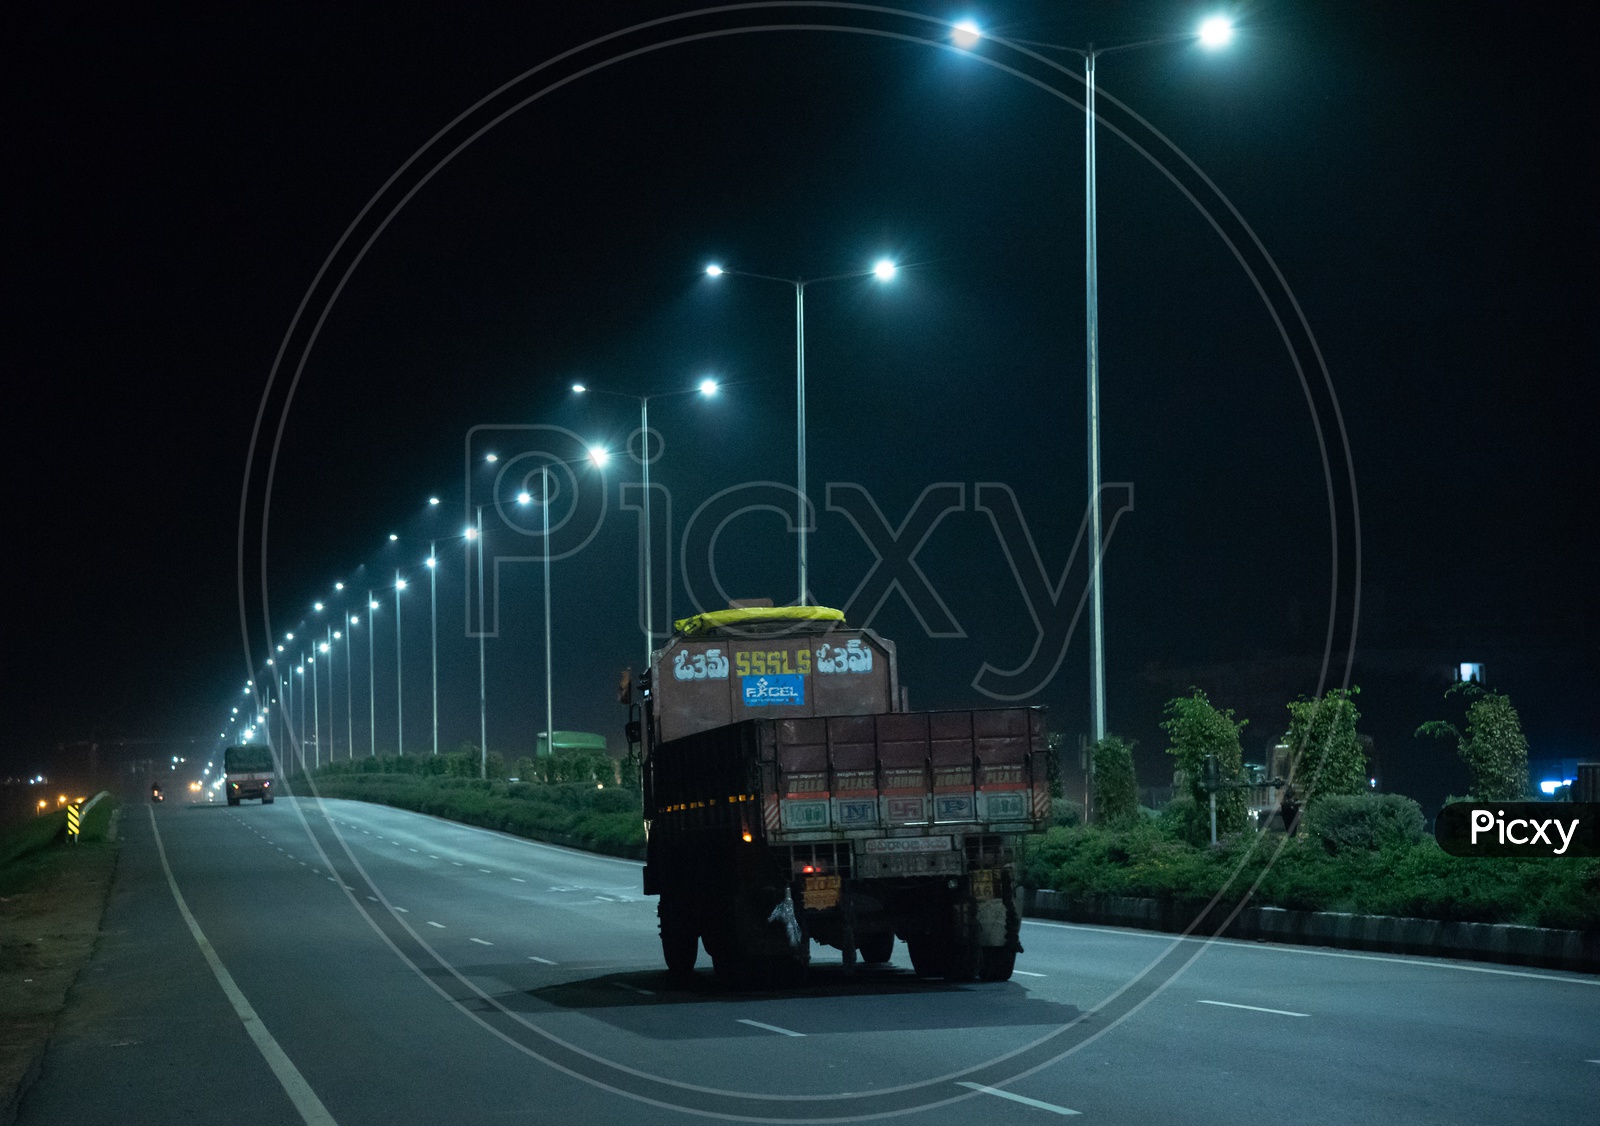 Heavy Vehicles under the LED Lights on NH 16 at nights.